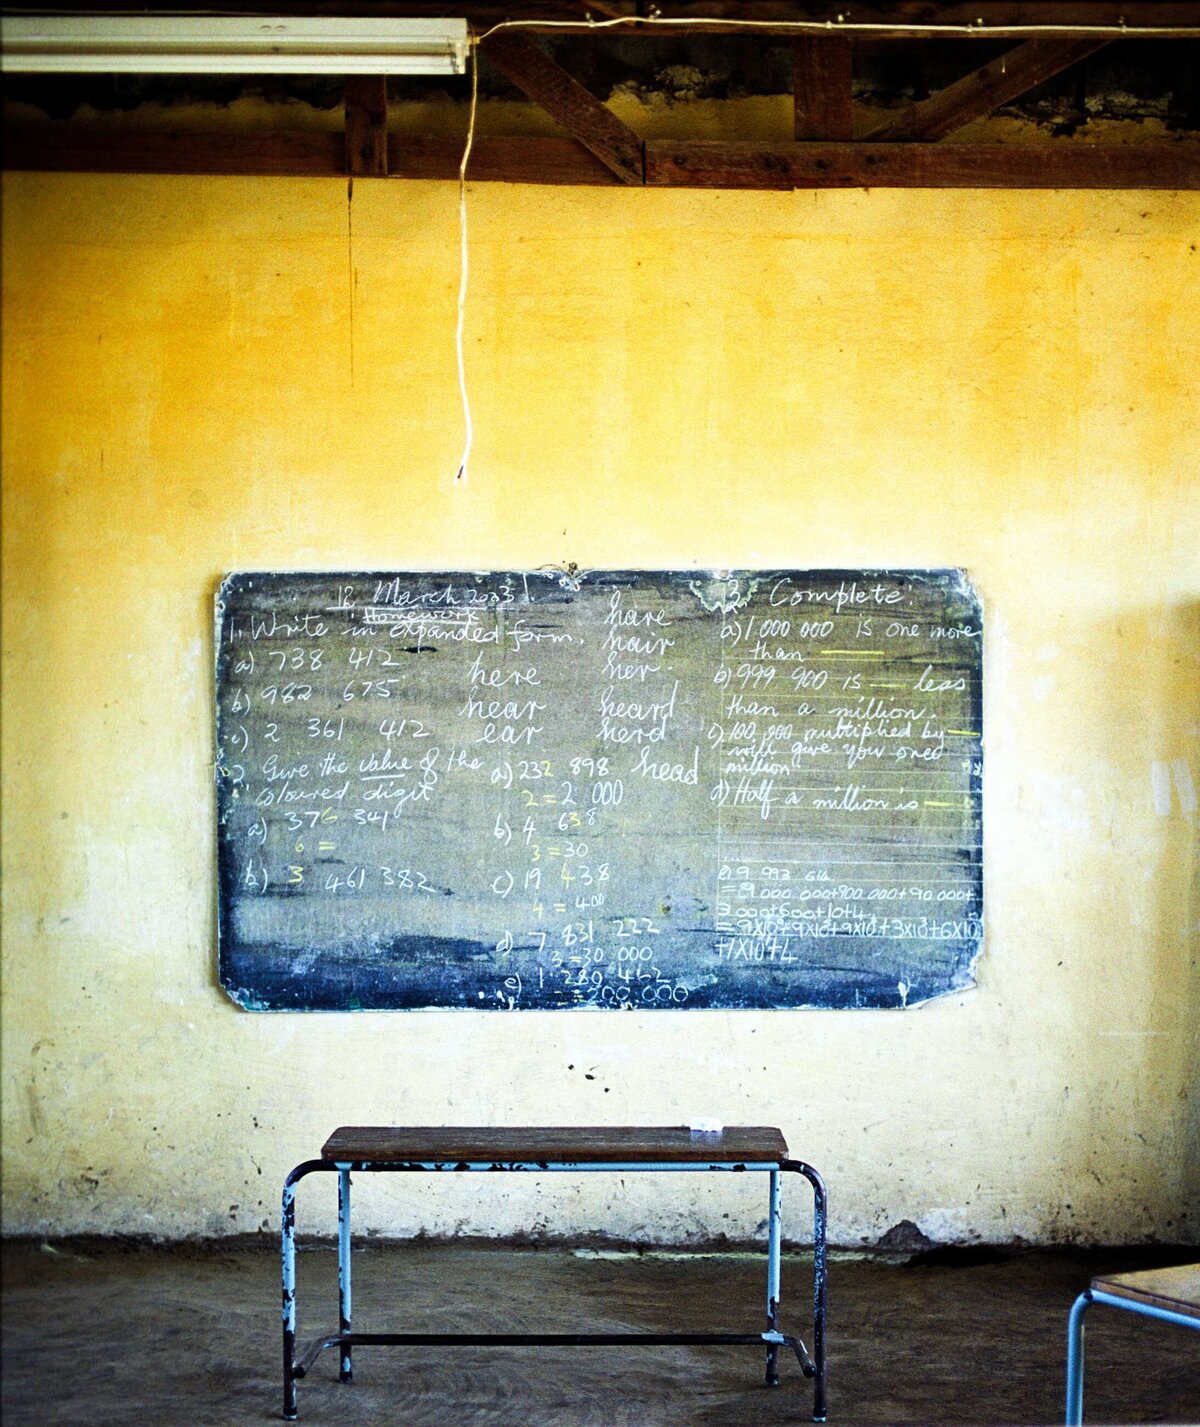 A math formula filled blackboard with yellow wall and old desk show the persistance of education as a means of empowerment and self-transformation